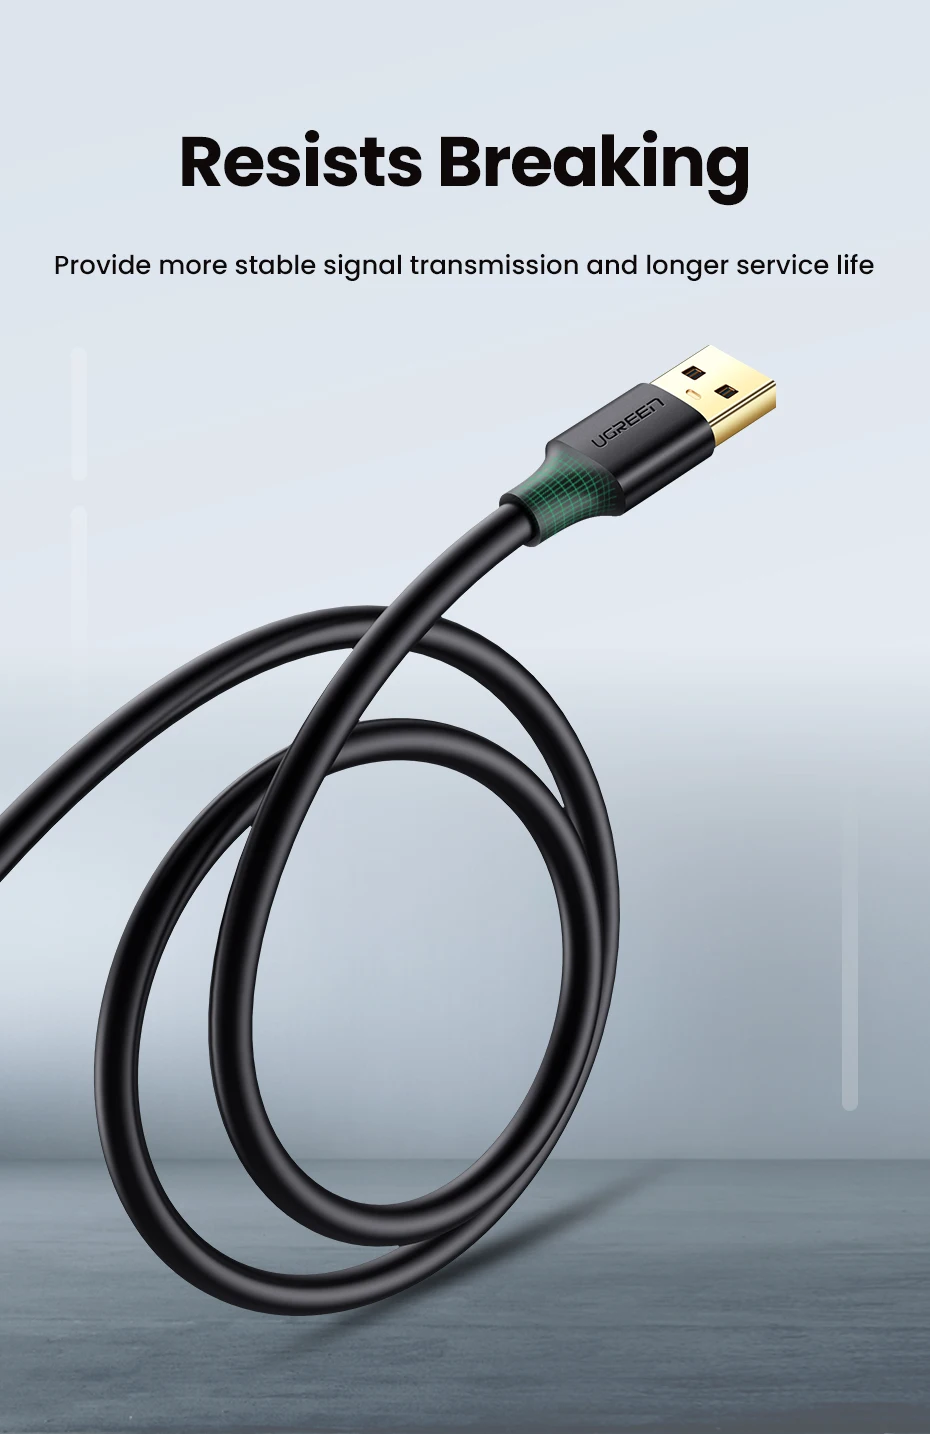 Ugreen USB Extension Cable USB 3.0 Cable